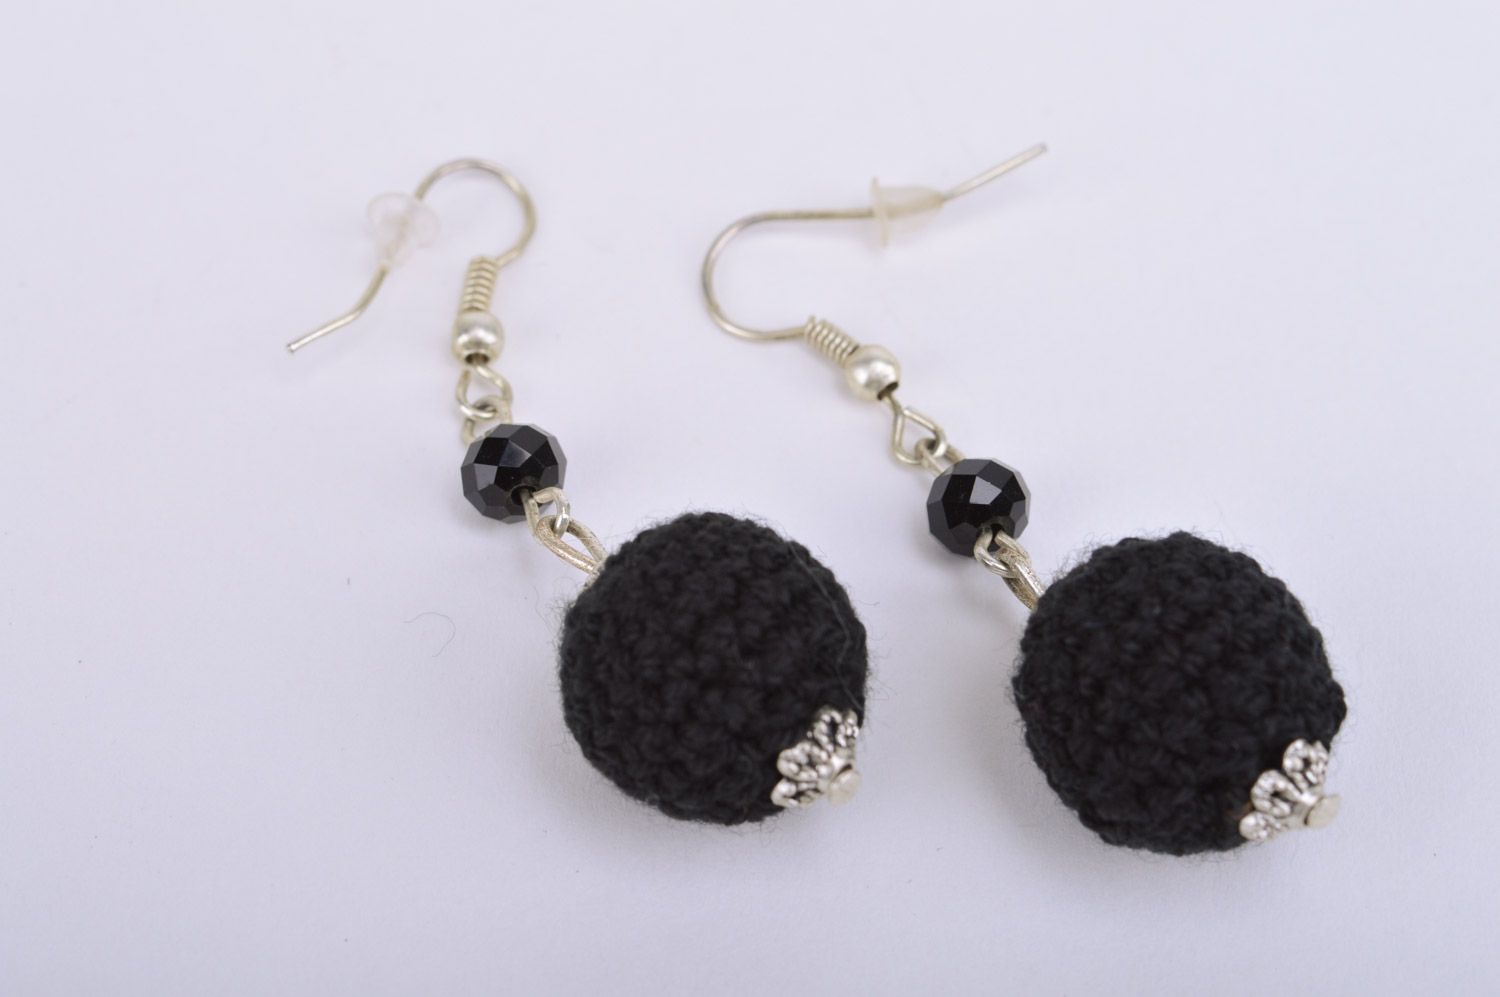 Handmade beautiful dangle earrings with beads crocheted over with black threads  photo 2